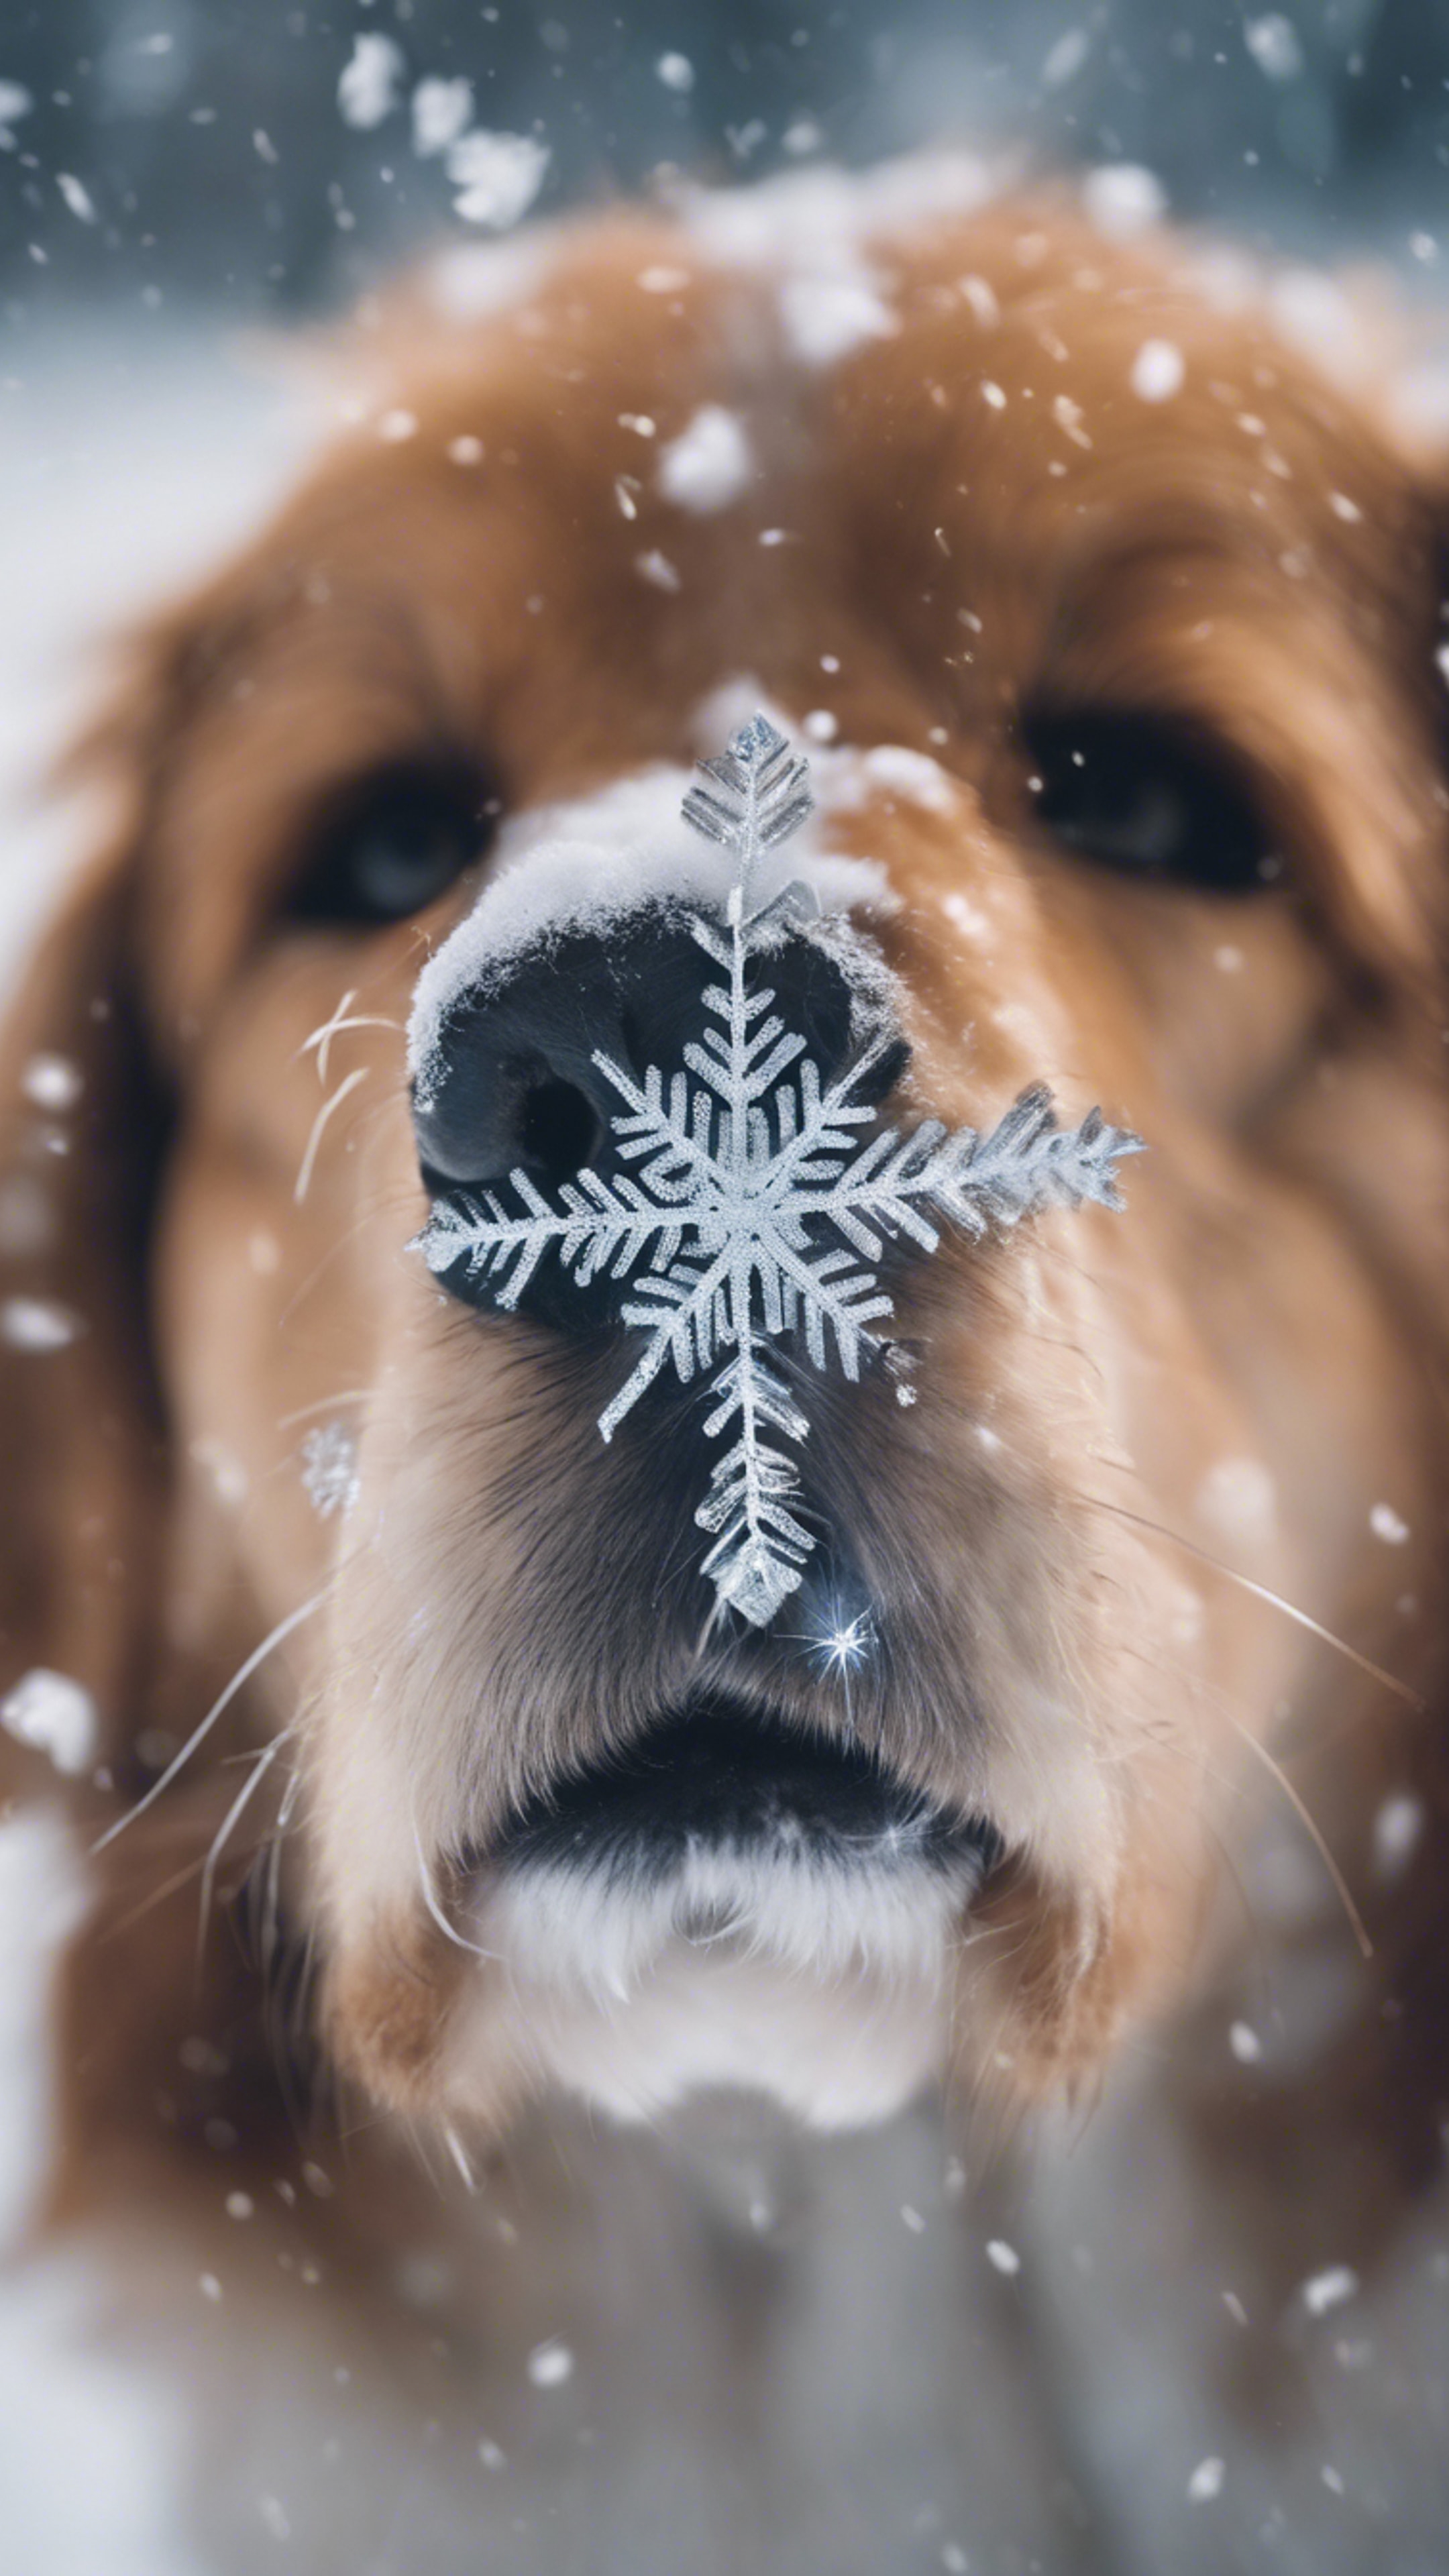 A close-up shot of a snowflake on a dog's nose.壁紙[749f4e72ddba4eb997fe]